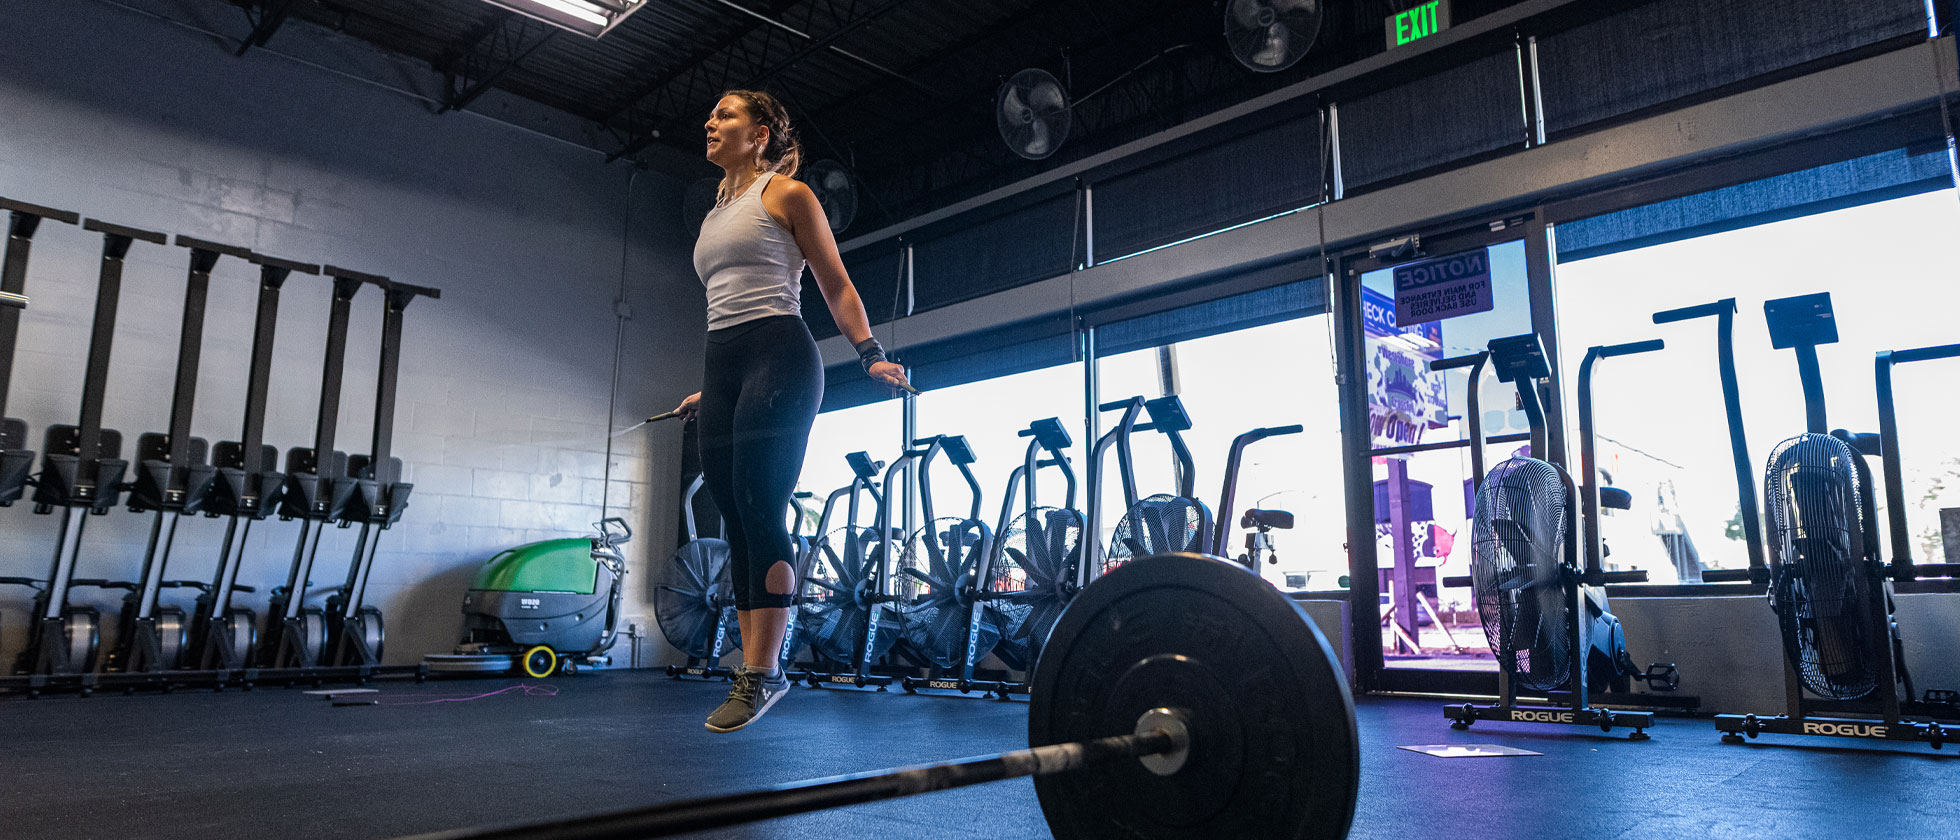 A Fitness Community In Downtown Tampa That Can Help You Lose Weight and Get Fit